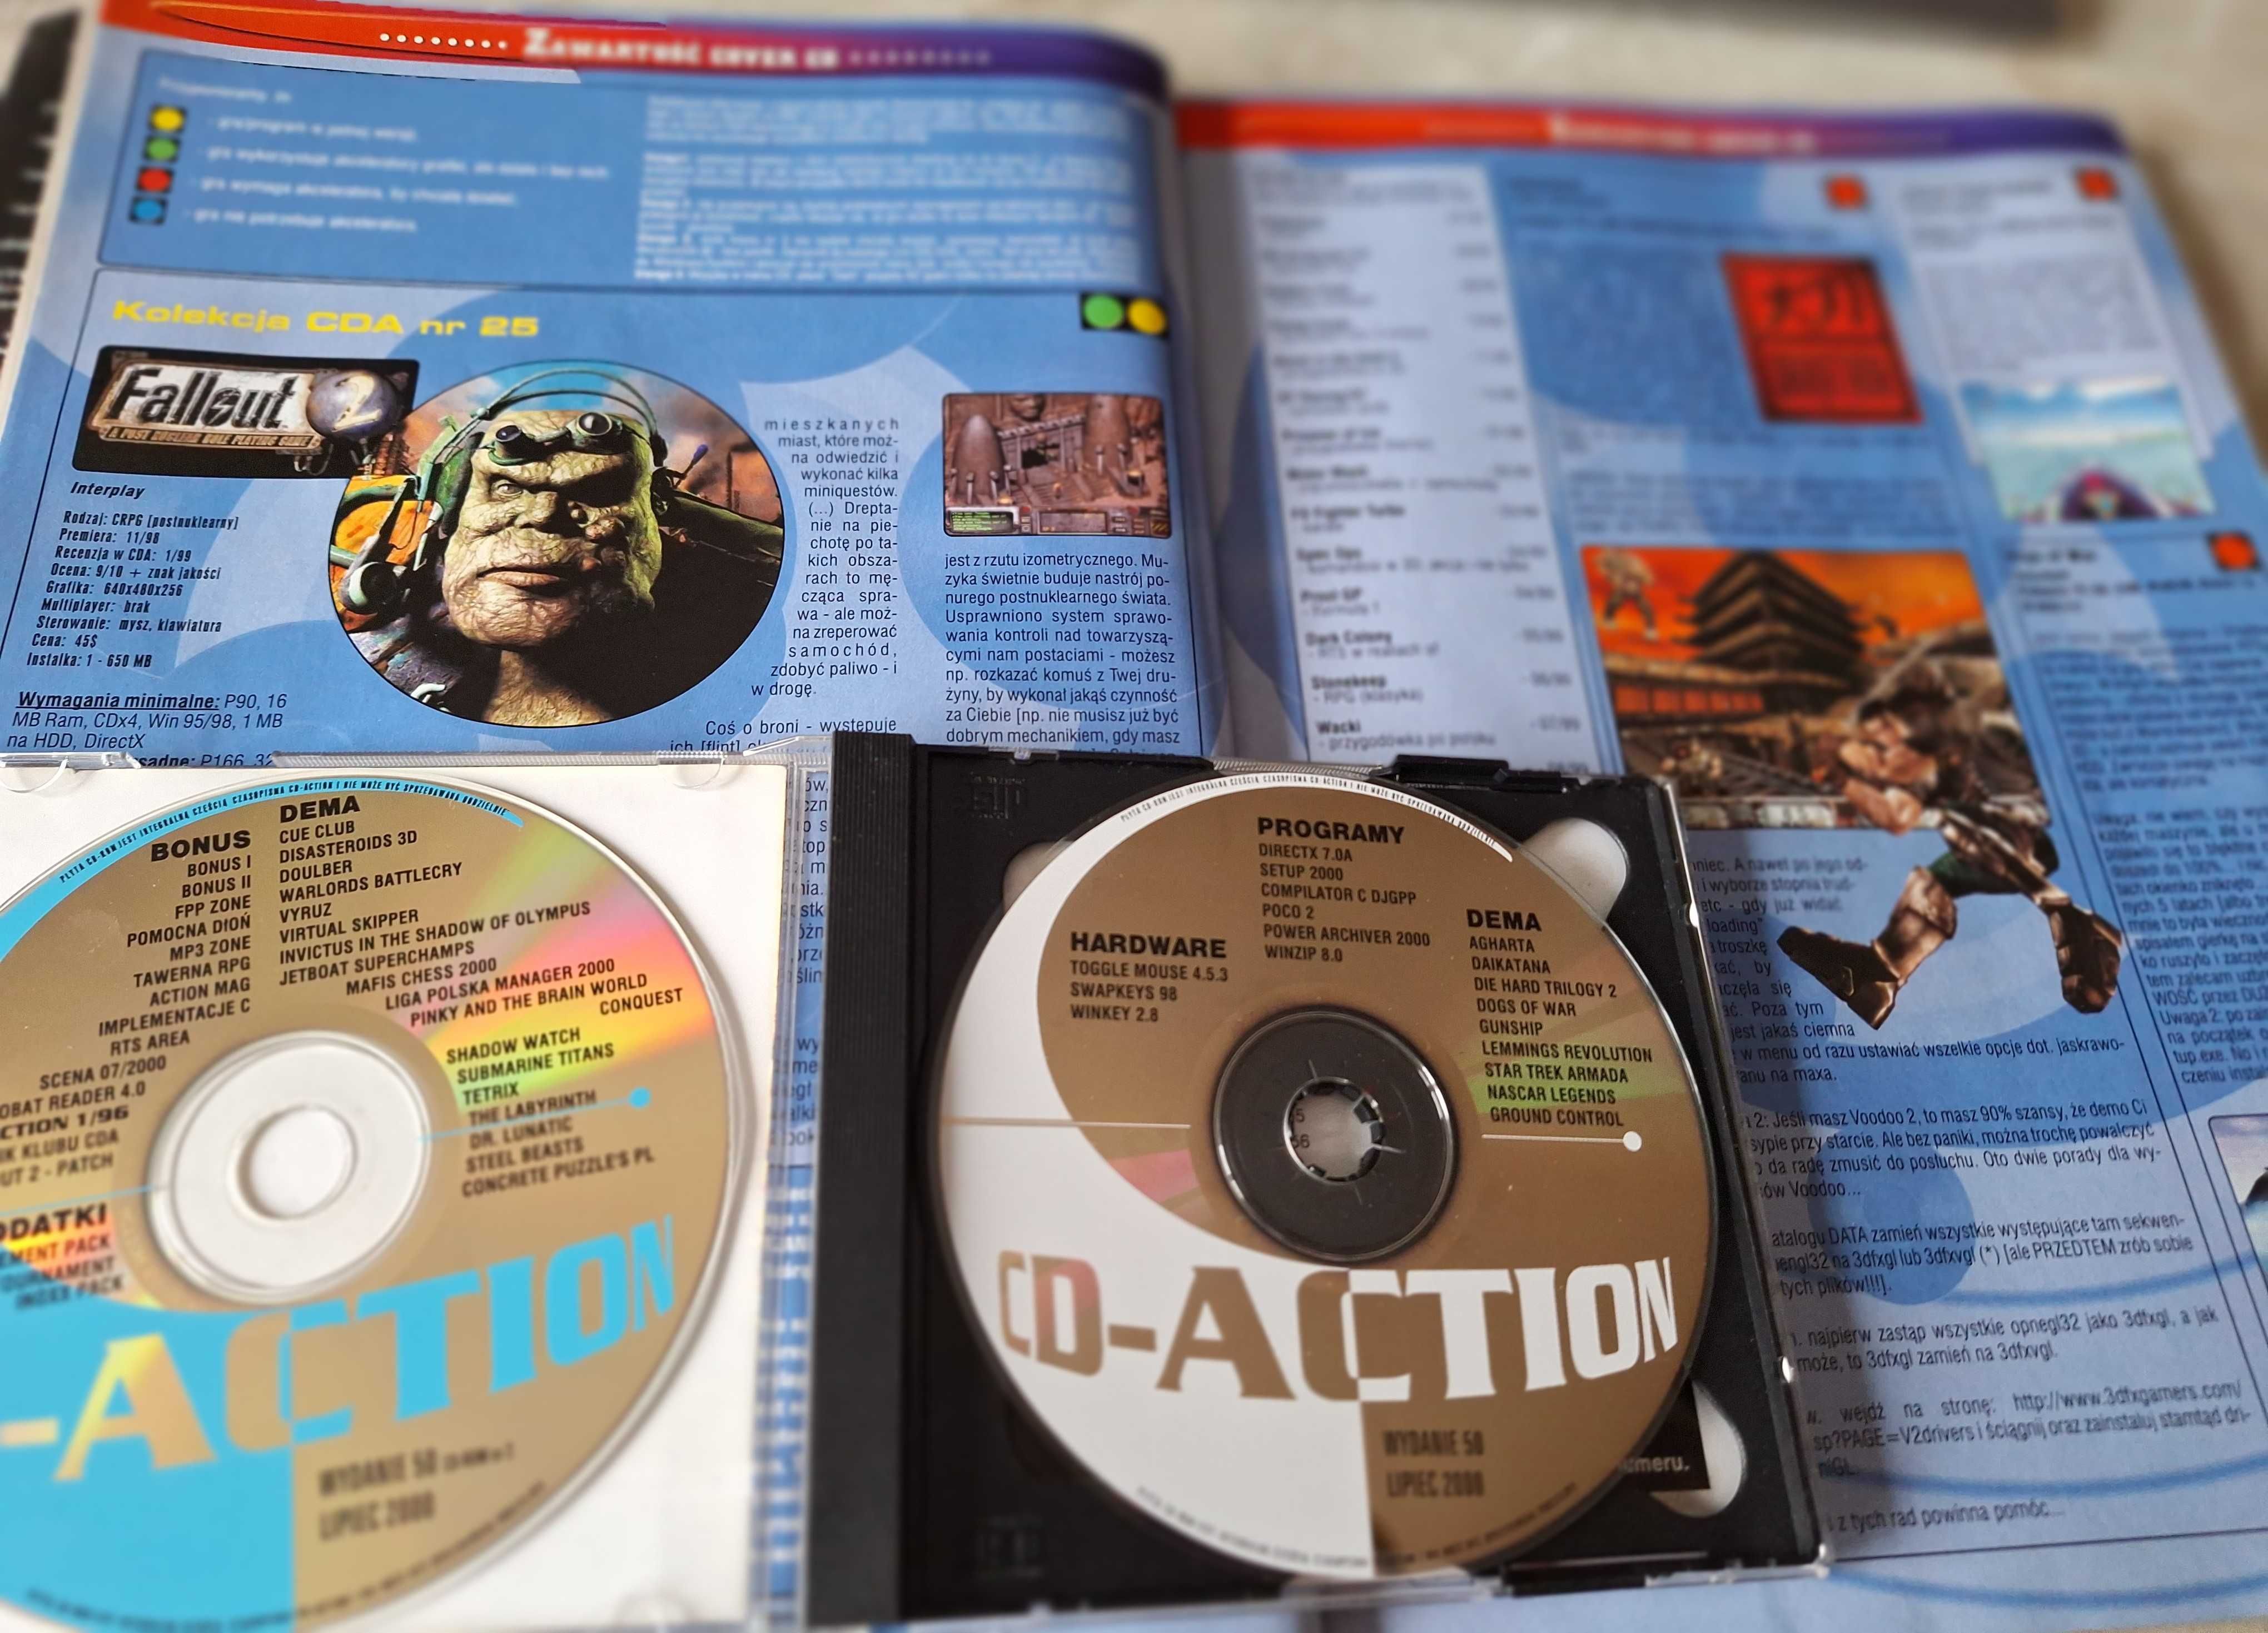 CD-Action 07/2000 z 2xCD + Fallout 2